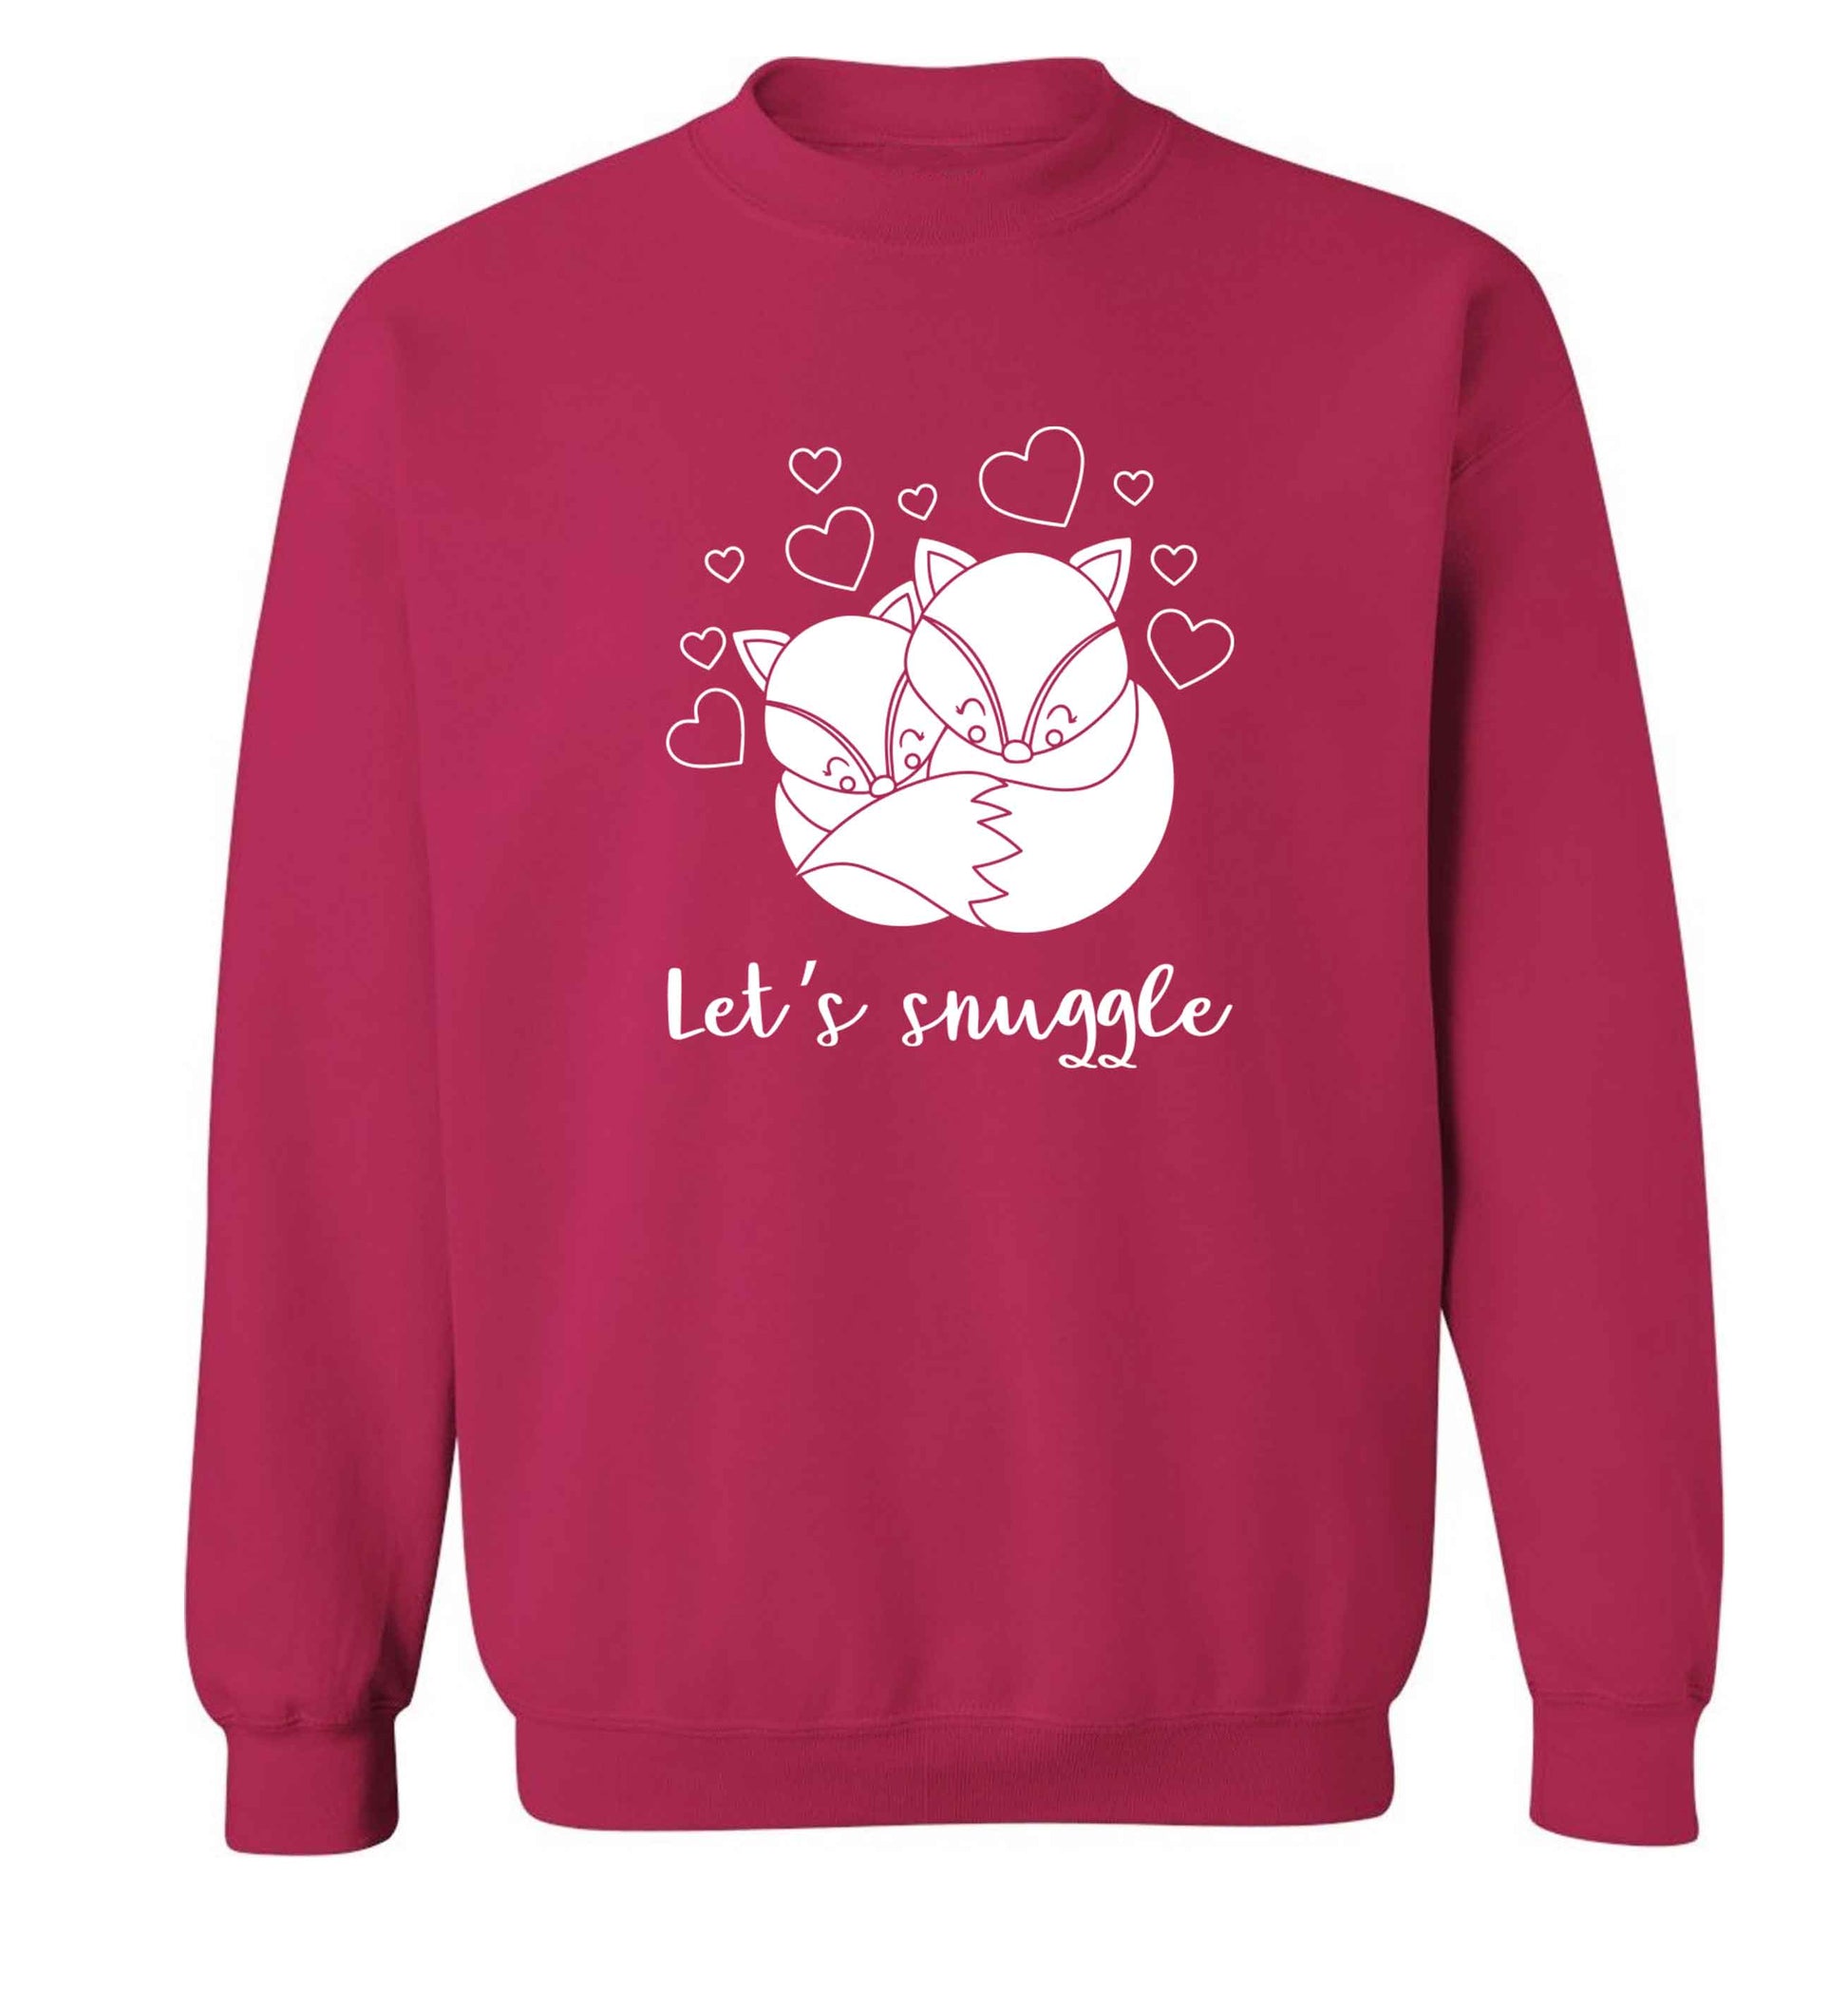 Let's snuggle adult's unisex pink sweater 2XL